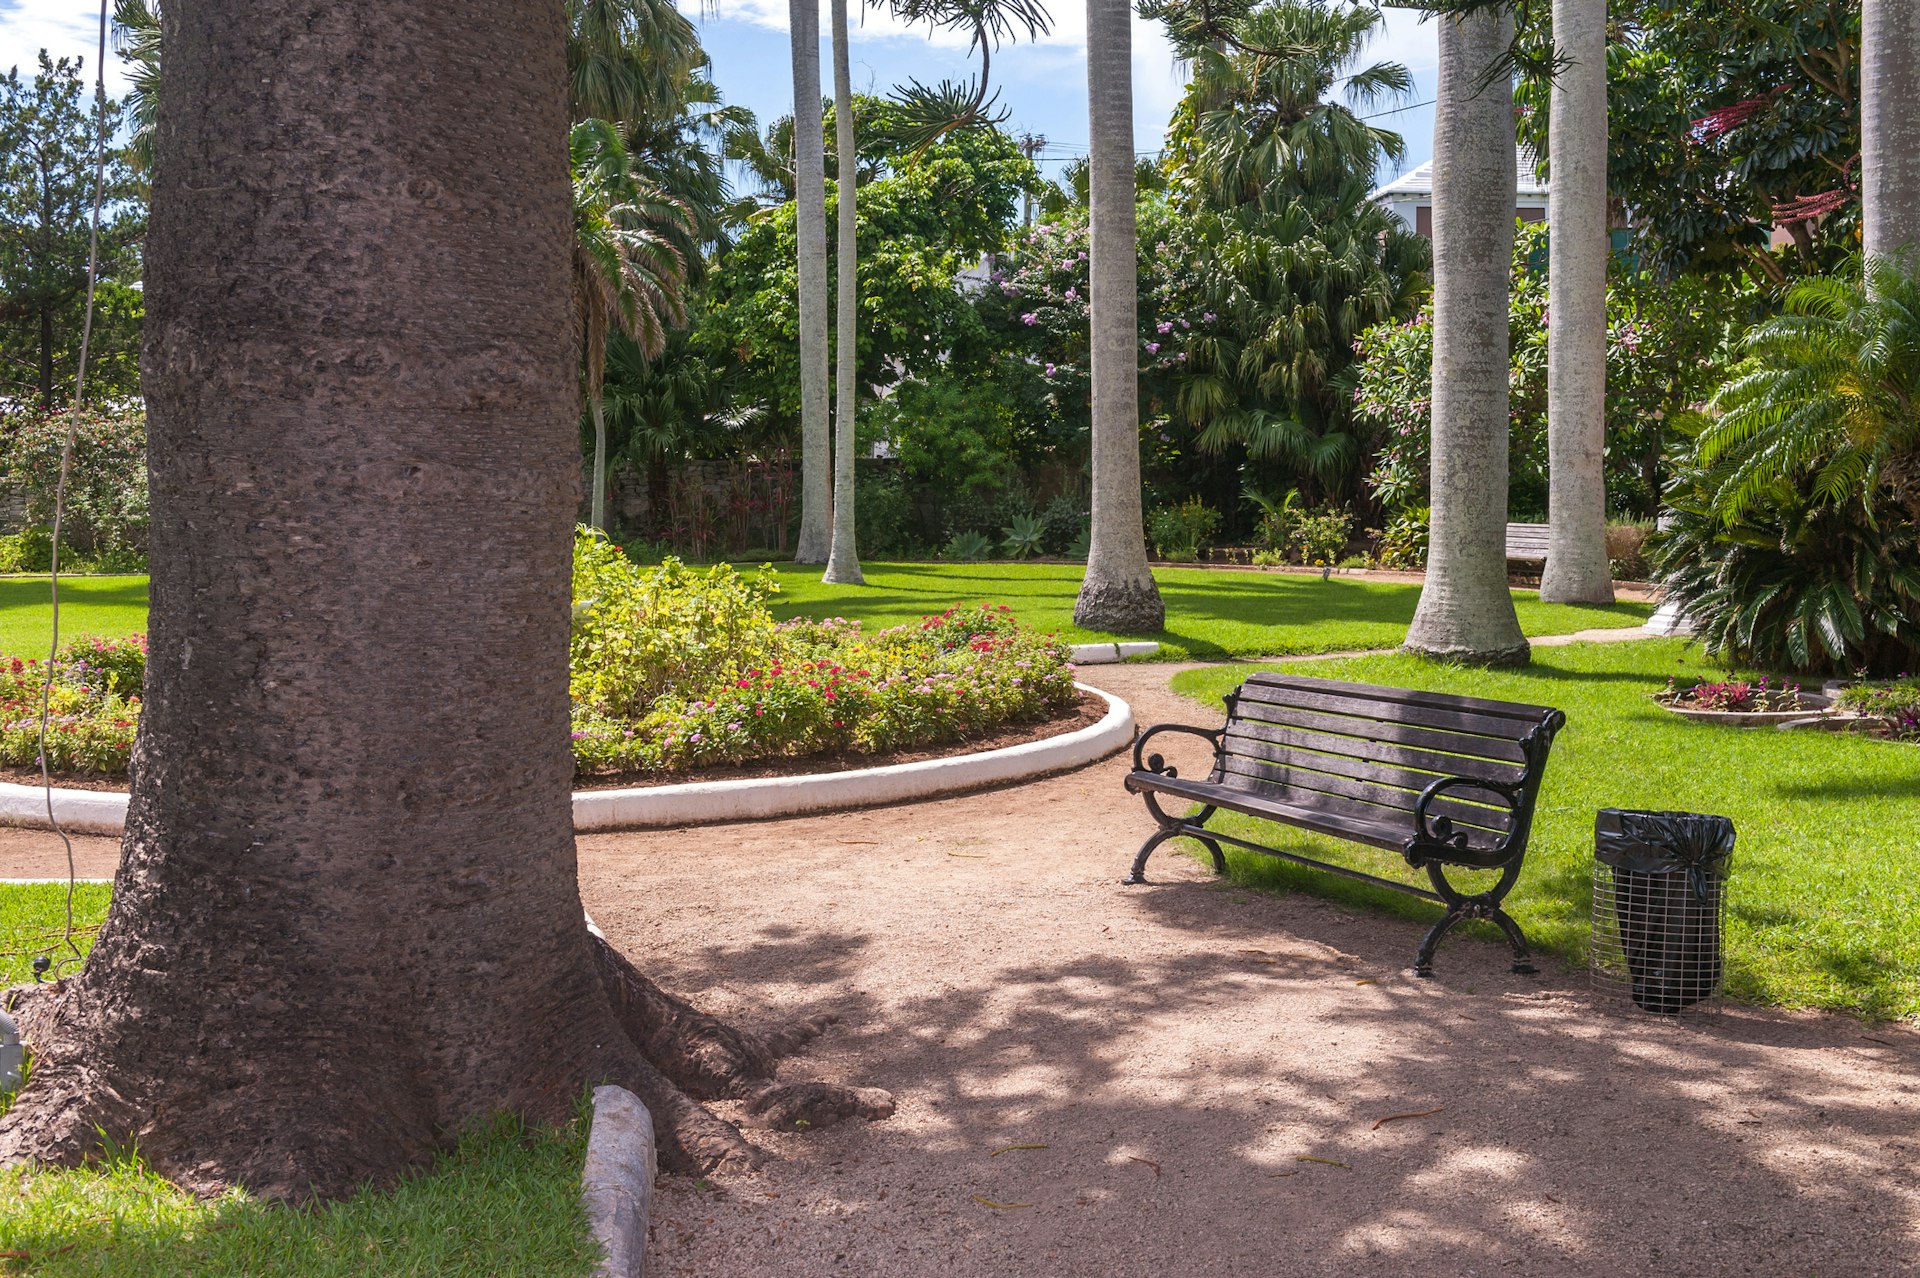 Central part of the Botanical garden of St. George, Bermuda with the bench under the shade of big trees near the pathway. Shot on a bright sunny day with no people.